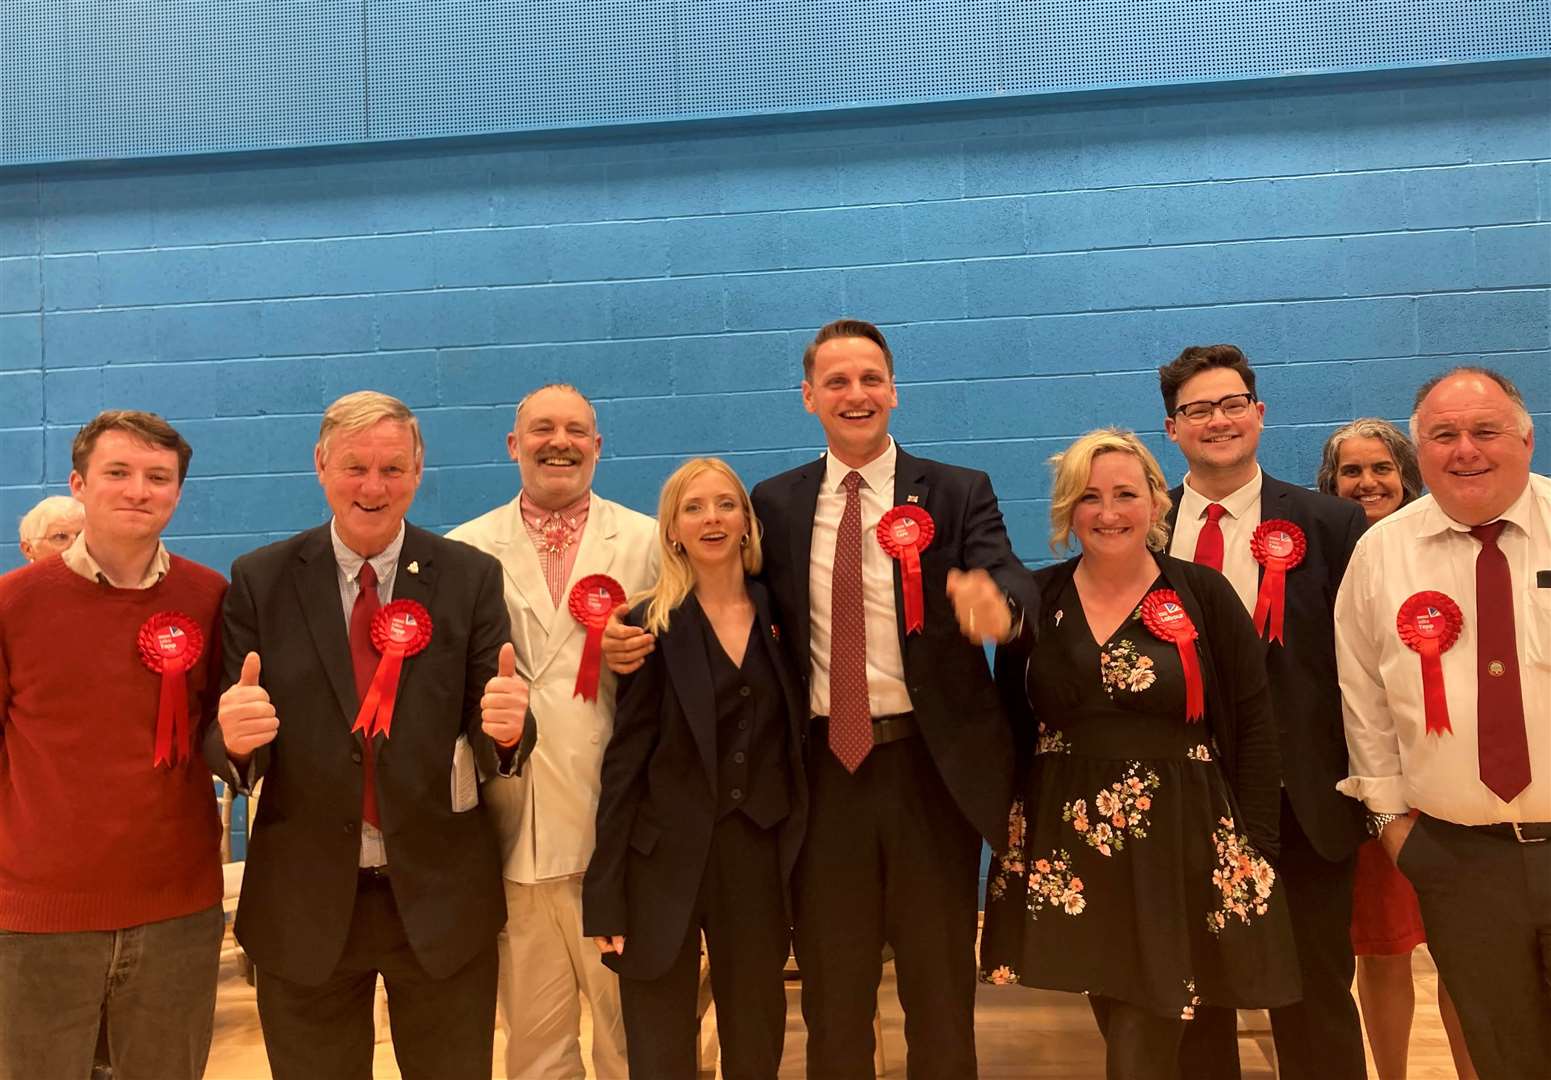 Labour's Mike Tapp (centre) and his campaign team celebrating their victory